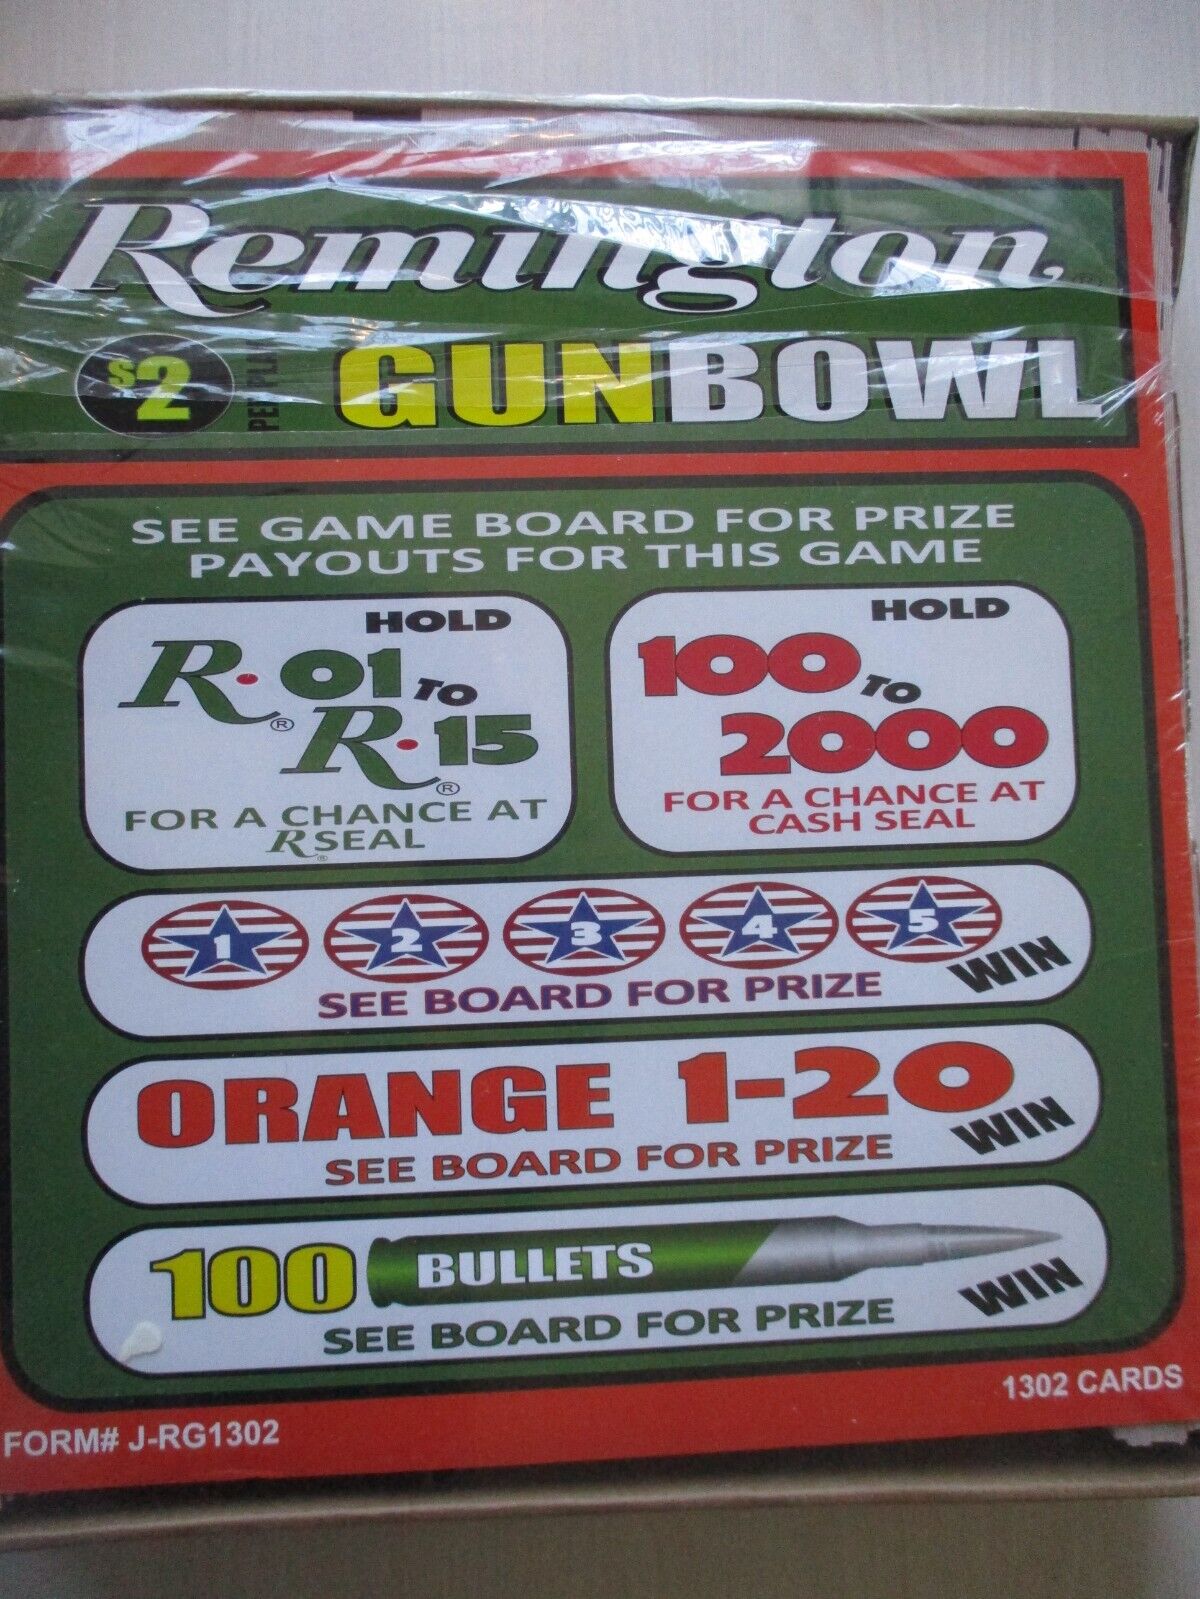 Remington Gun Bowl - NEW Sealed - Pull Tickets/Tab For Collectors/Amusement